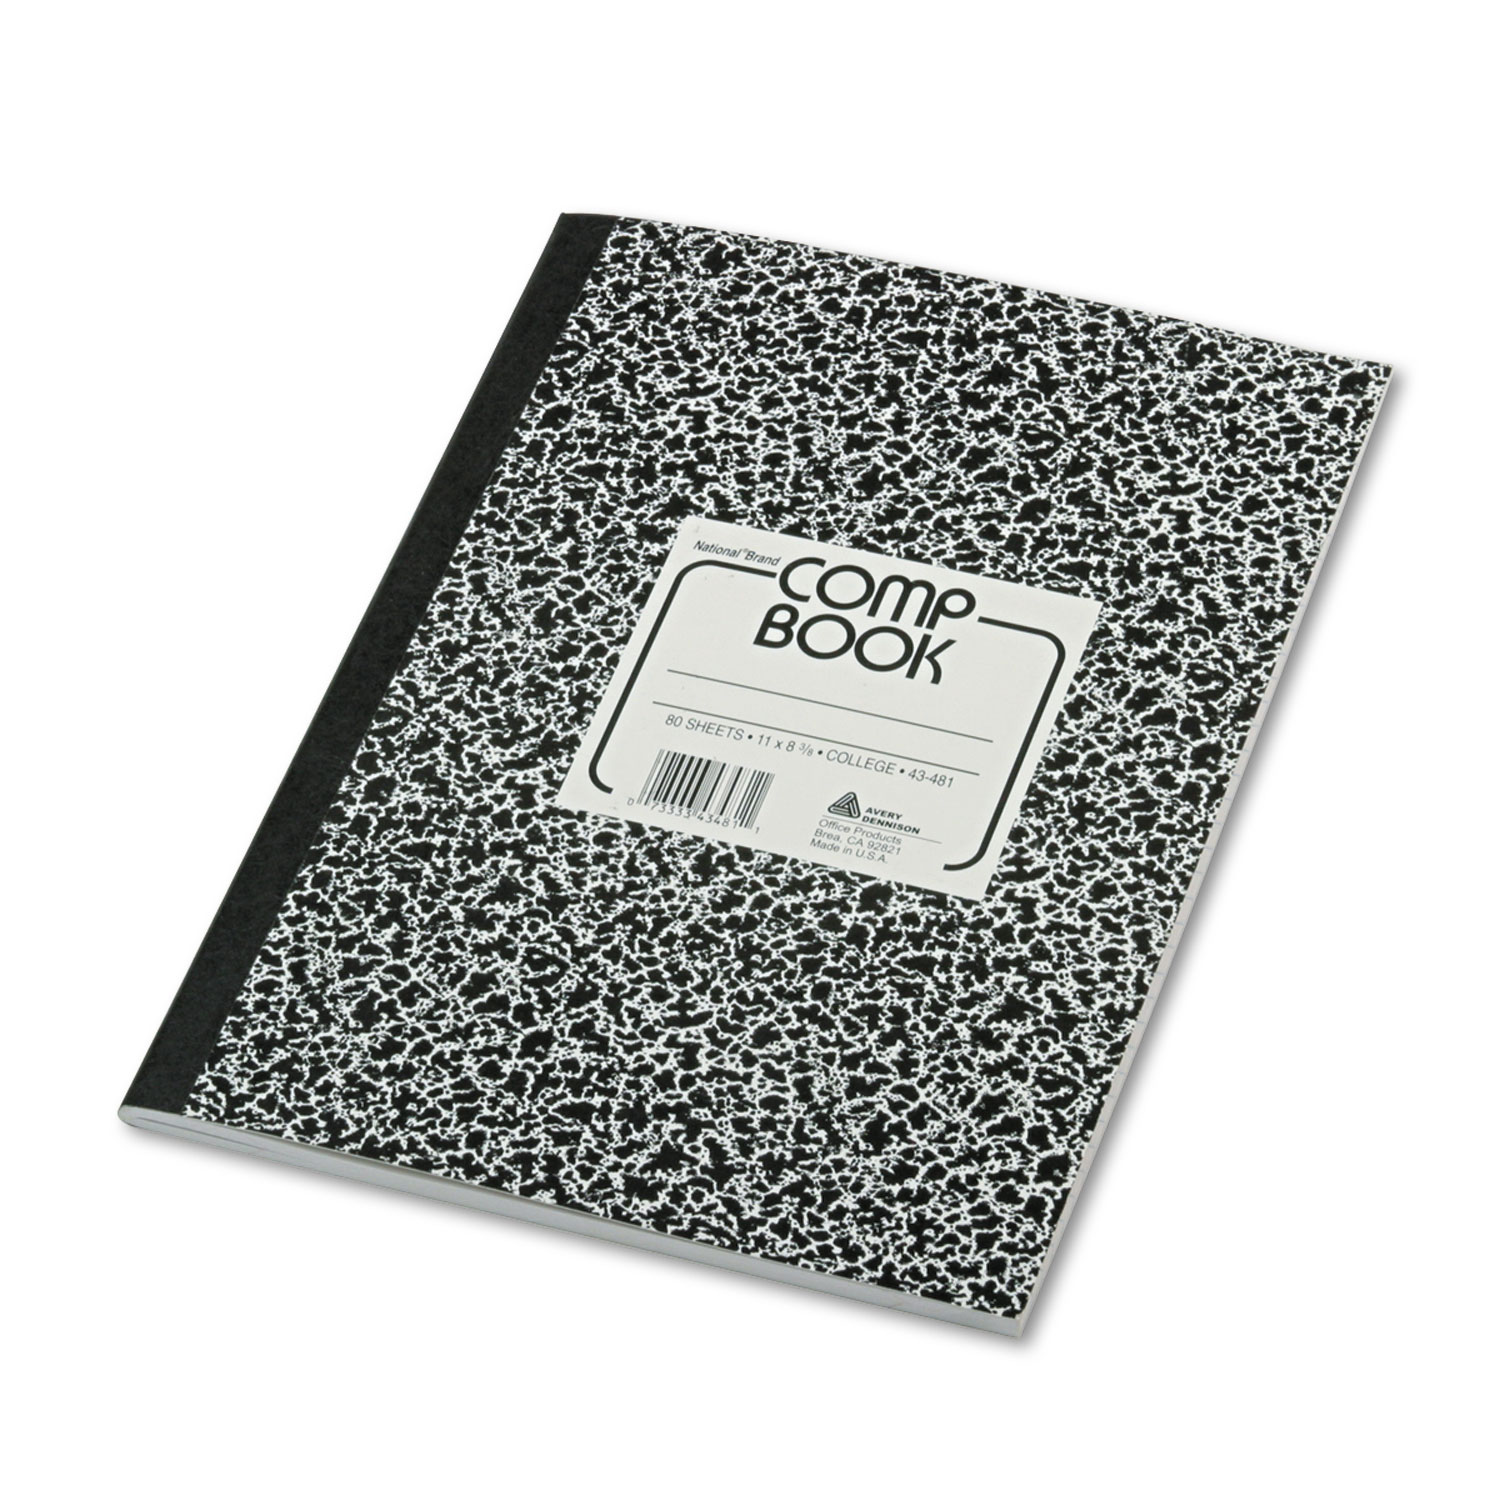  National 43481 Composition Notebook, Medium/College Rule, Black Marble Cover, 11 x 8.38, 80 Sheets (RED43481) 